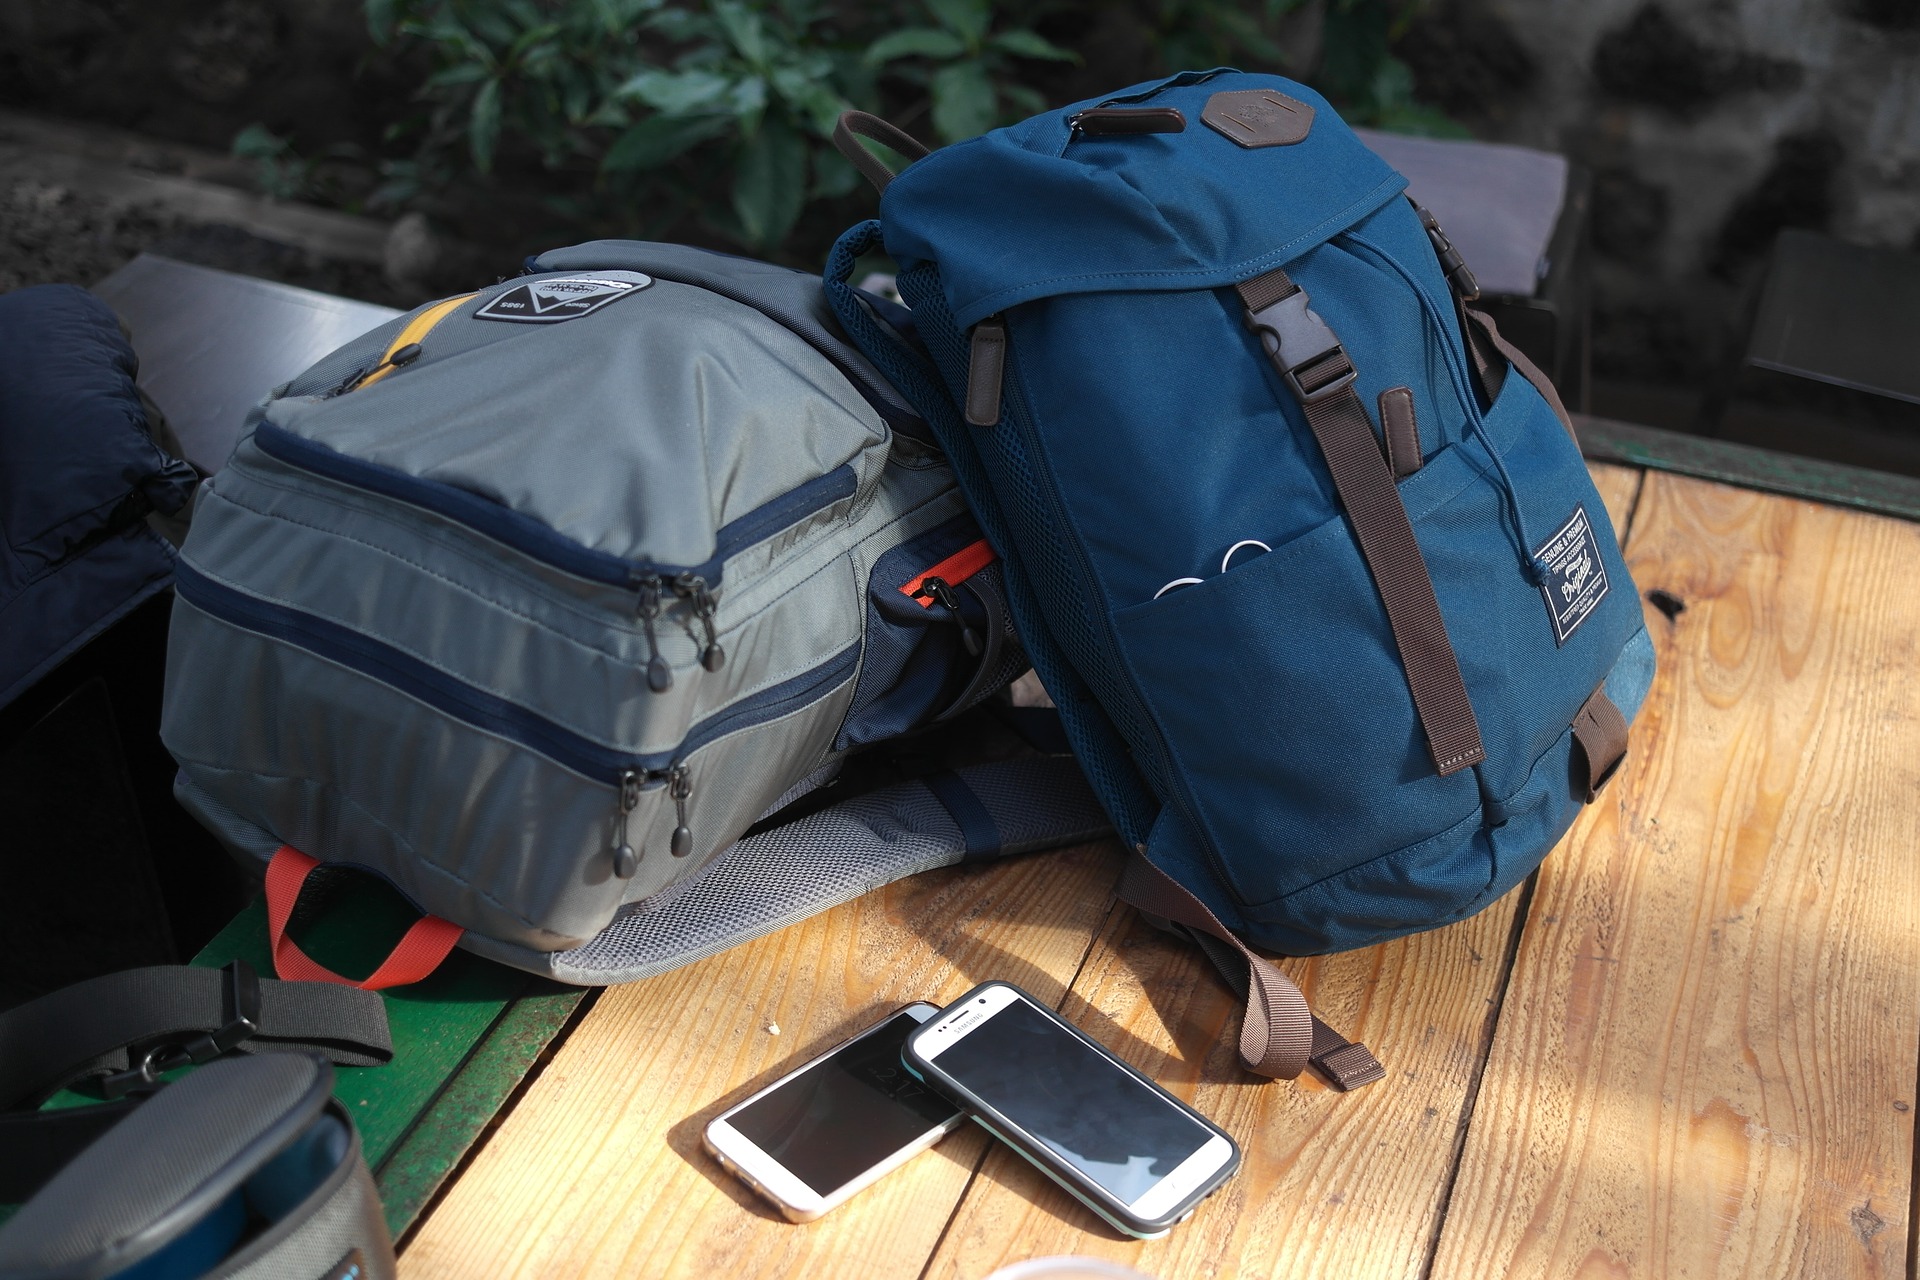 Backpacks for laptops and devices